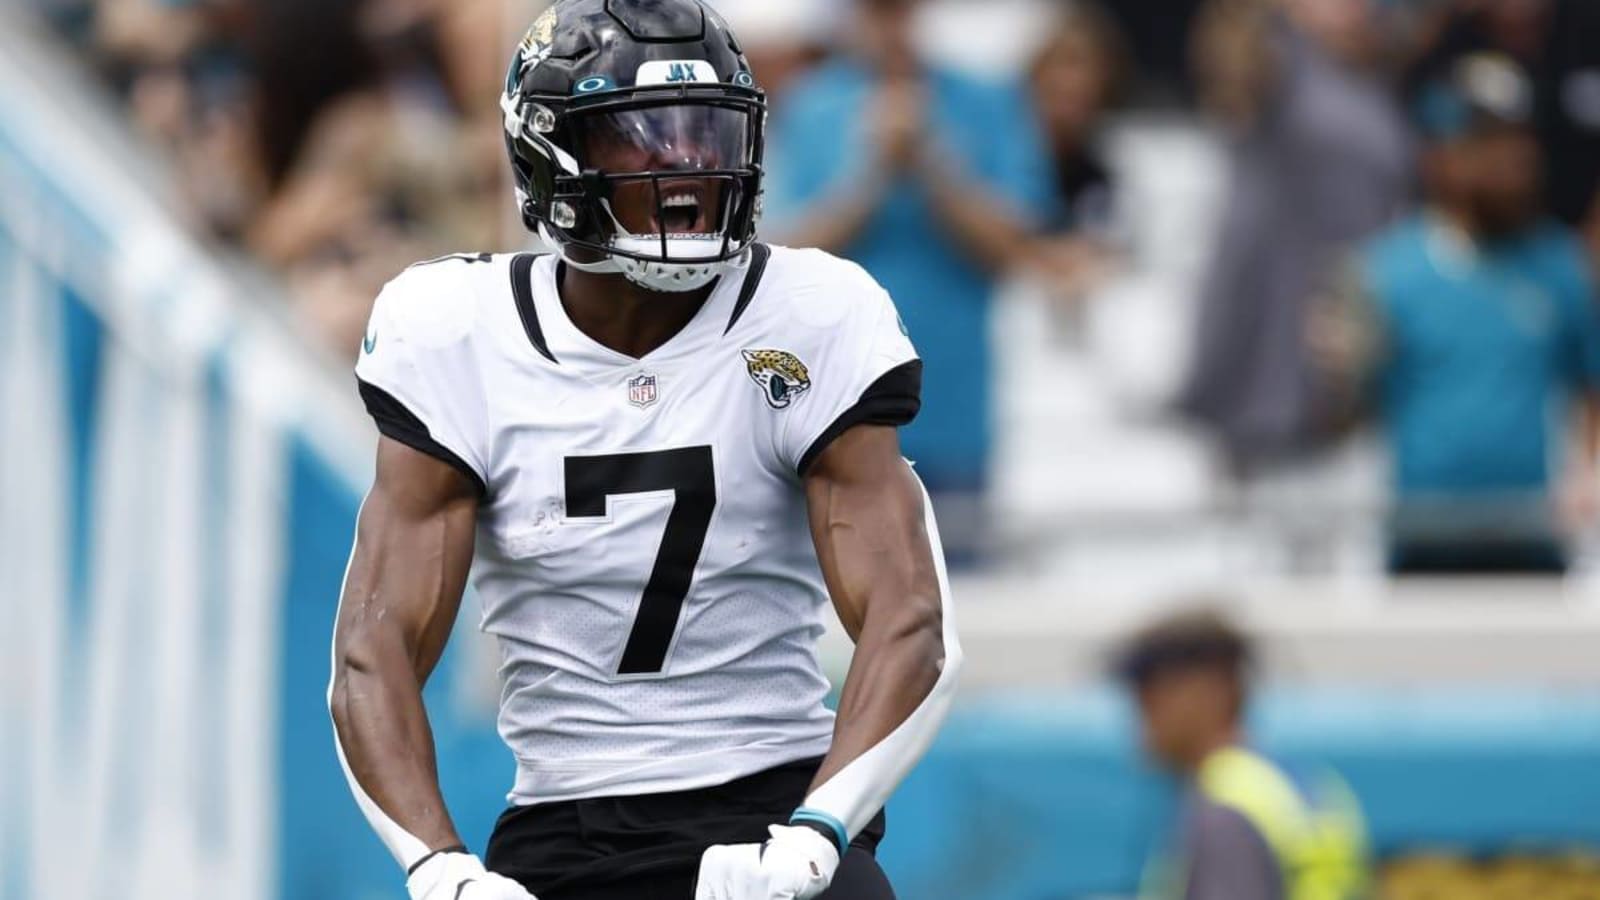 Jaguars vs. Eagles: Zay Jones, Shaquill Griffin Listed as Questionable